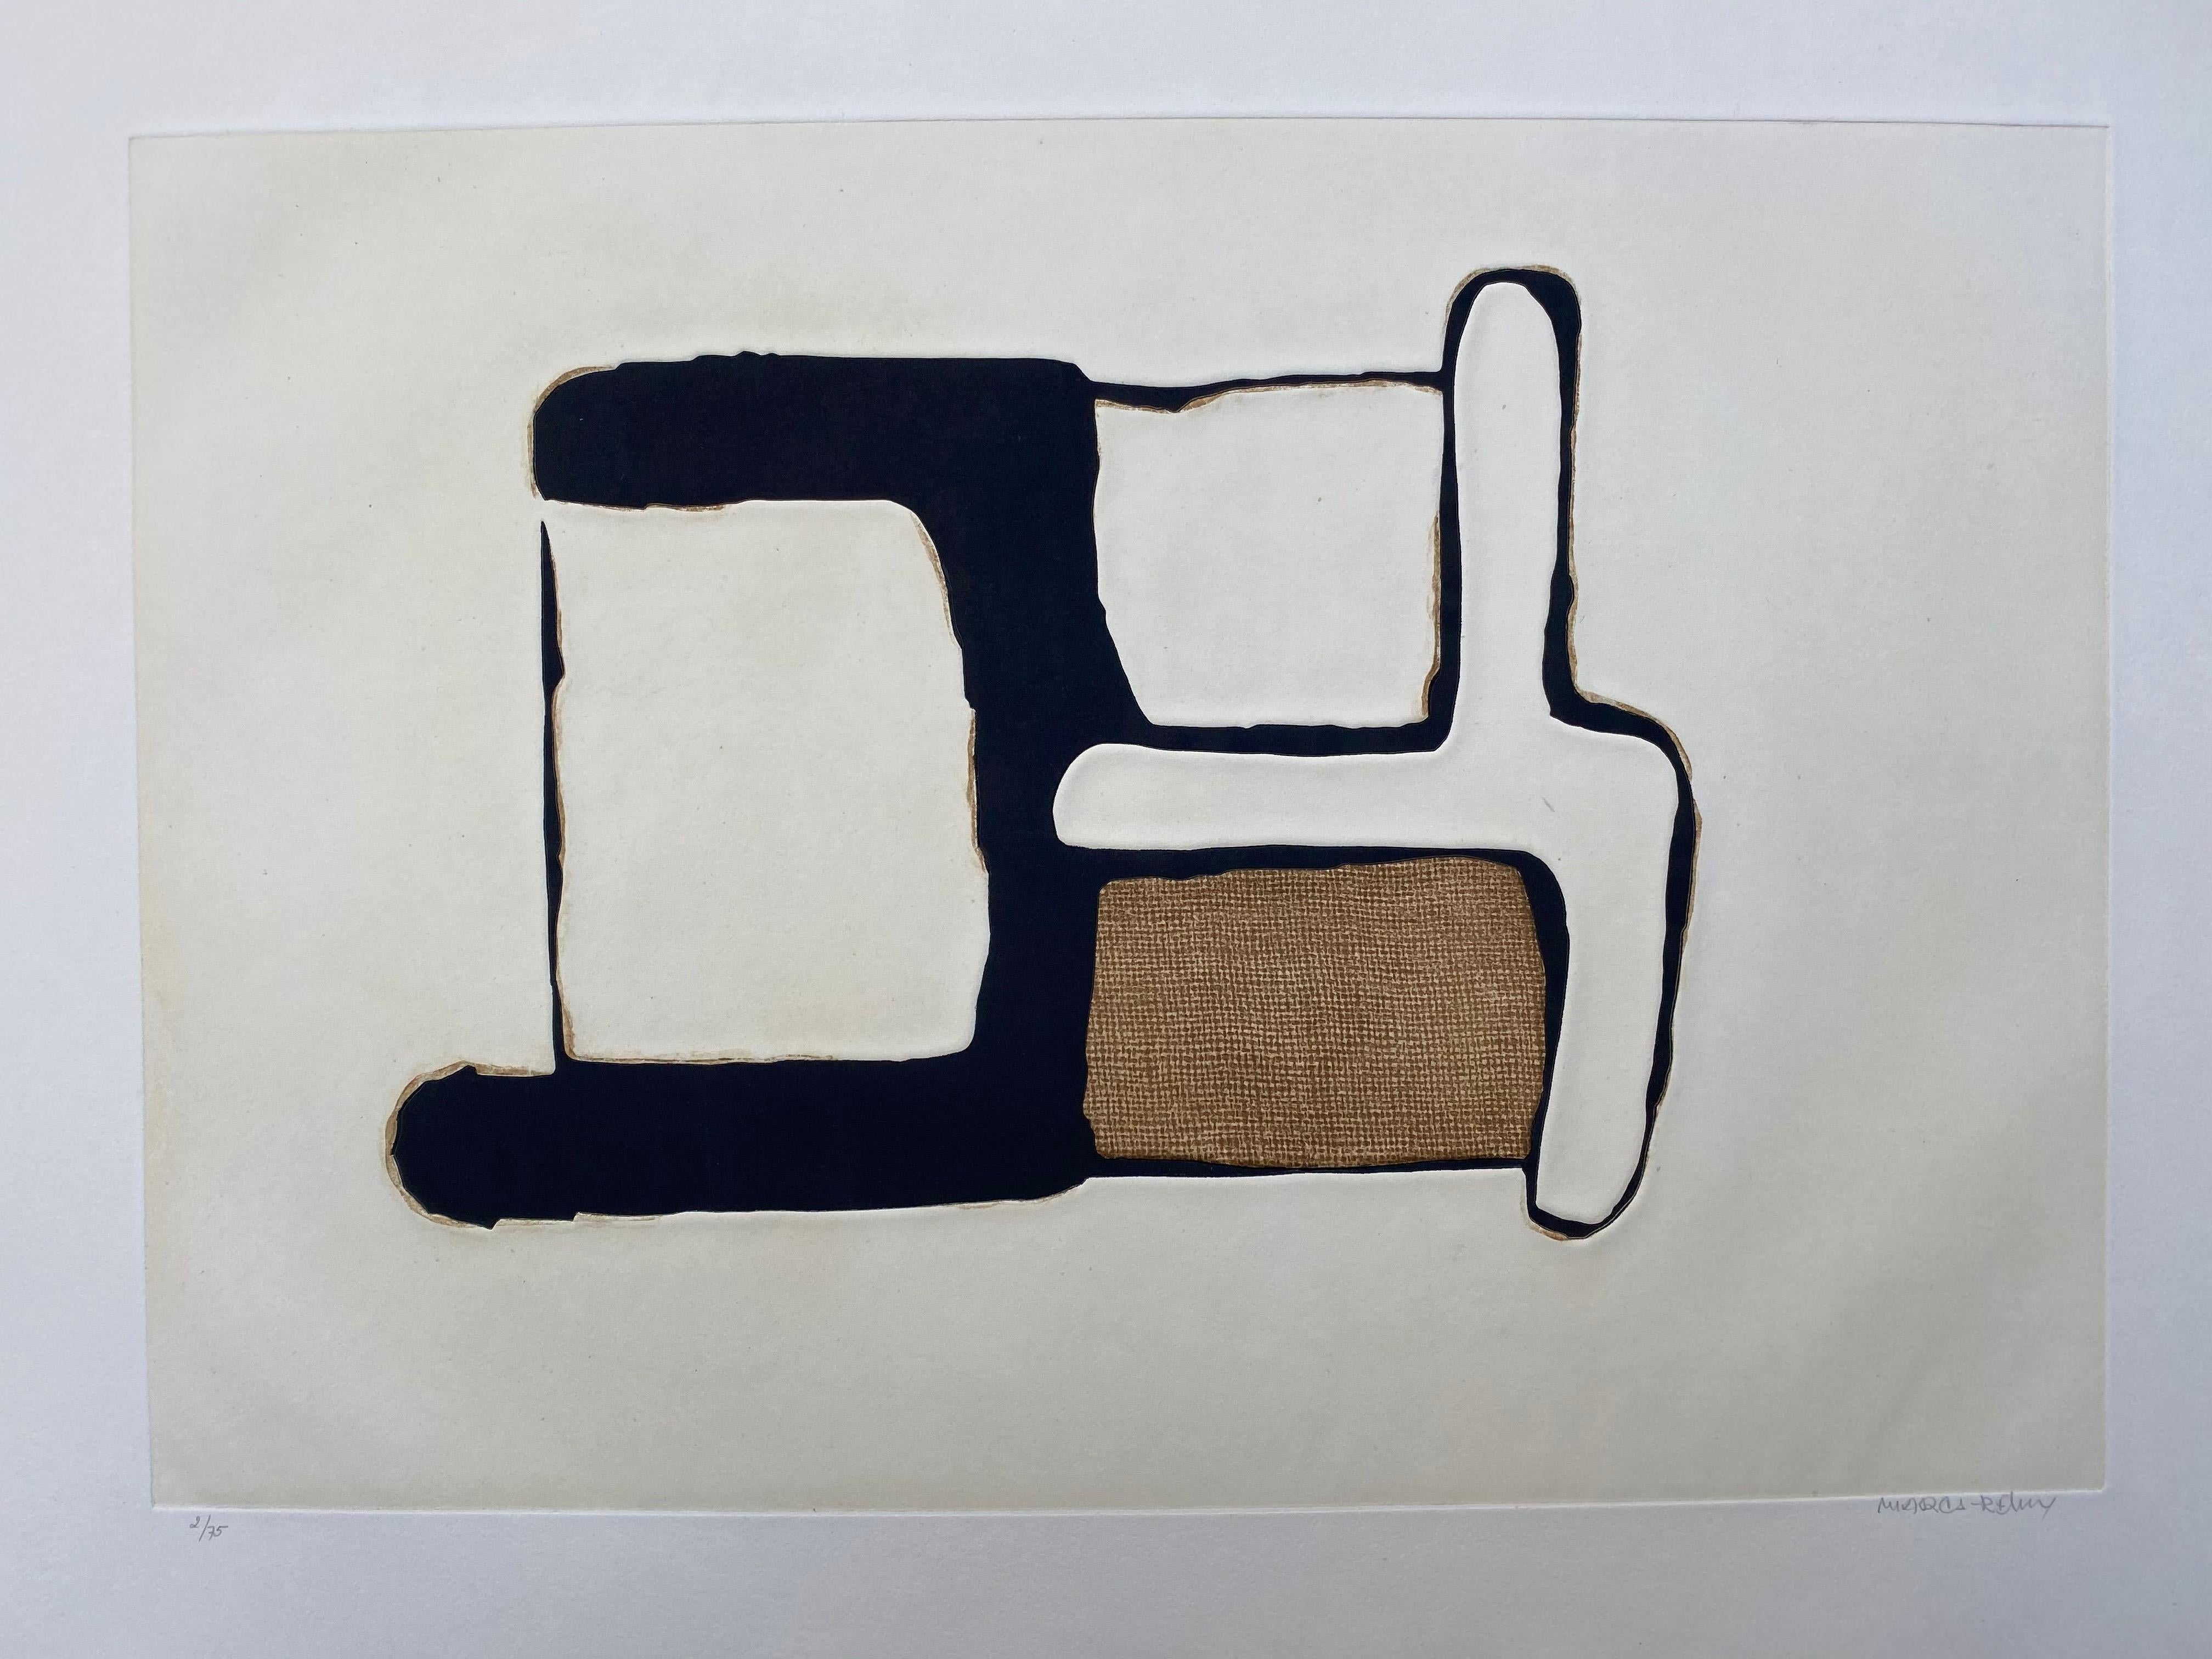 Conrad Marca-Relli

Composition 4
2/75
Mixed media on guarro paper
Poligrafa Edition
Numbered out of 75 and signed in pencil by the artist 
Circa 1977
77 x 56,5 cm
Perfect condition 
1100 euros 